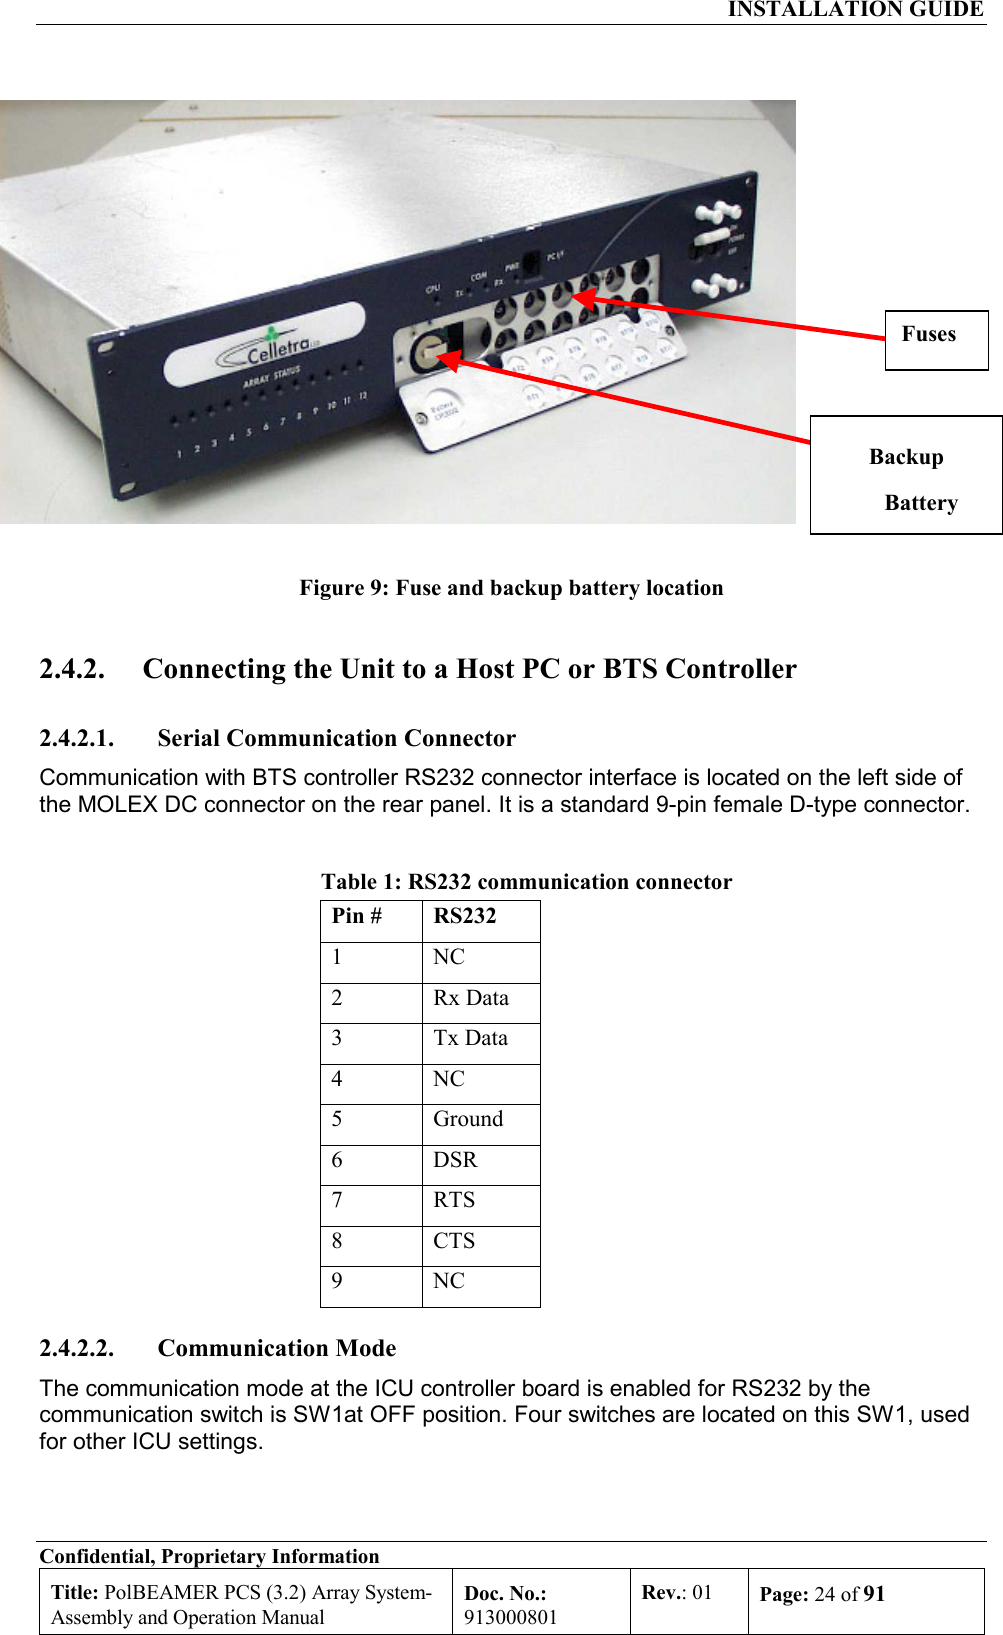  INSTALLATION GUIDE Confidential, Proprietary Information Title: PolBEAMER PCS (3.2) Array System- Assembly and Operation Manual Doc. No.: 913000801 Rev.: 01  Page: 24 of 91   Figure 9: Fuse and backup battery location 2.4.2.  Connecting the Unit to a Host PC or BTS Controller 2.4.2.1.  Serial Communication Connector Communication with BTS controller RS232 connector interface is located on the left side of the MOLEX DC connector on the rear panel. It is a standard 9-pin female D-type connector.   Table 1: RS232 communication connector  Pin #  RS232 1 NC 2 Rx Data 3 Tx Data 4 NC 5 Ground 6 DSR 7 RTS 8 CTS 9 NC 2.4.2.2. Communication Mode The communication mode at the ICU controller board is enabled for RS232 by the communication switch is SW1at OFF position. Four switches are located on this SW1, used for other ICU settings.  Backup Battery Fuses 